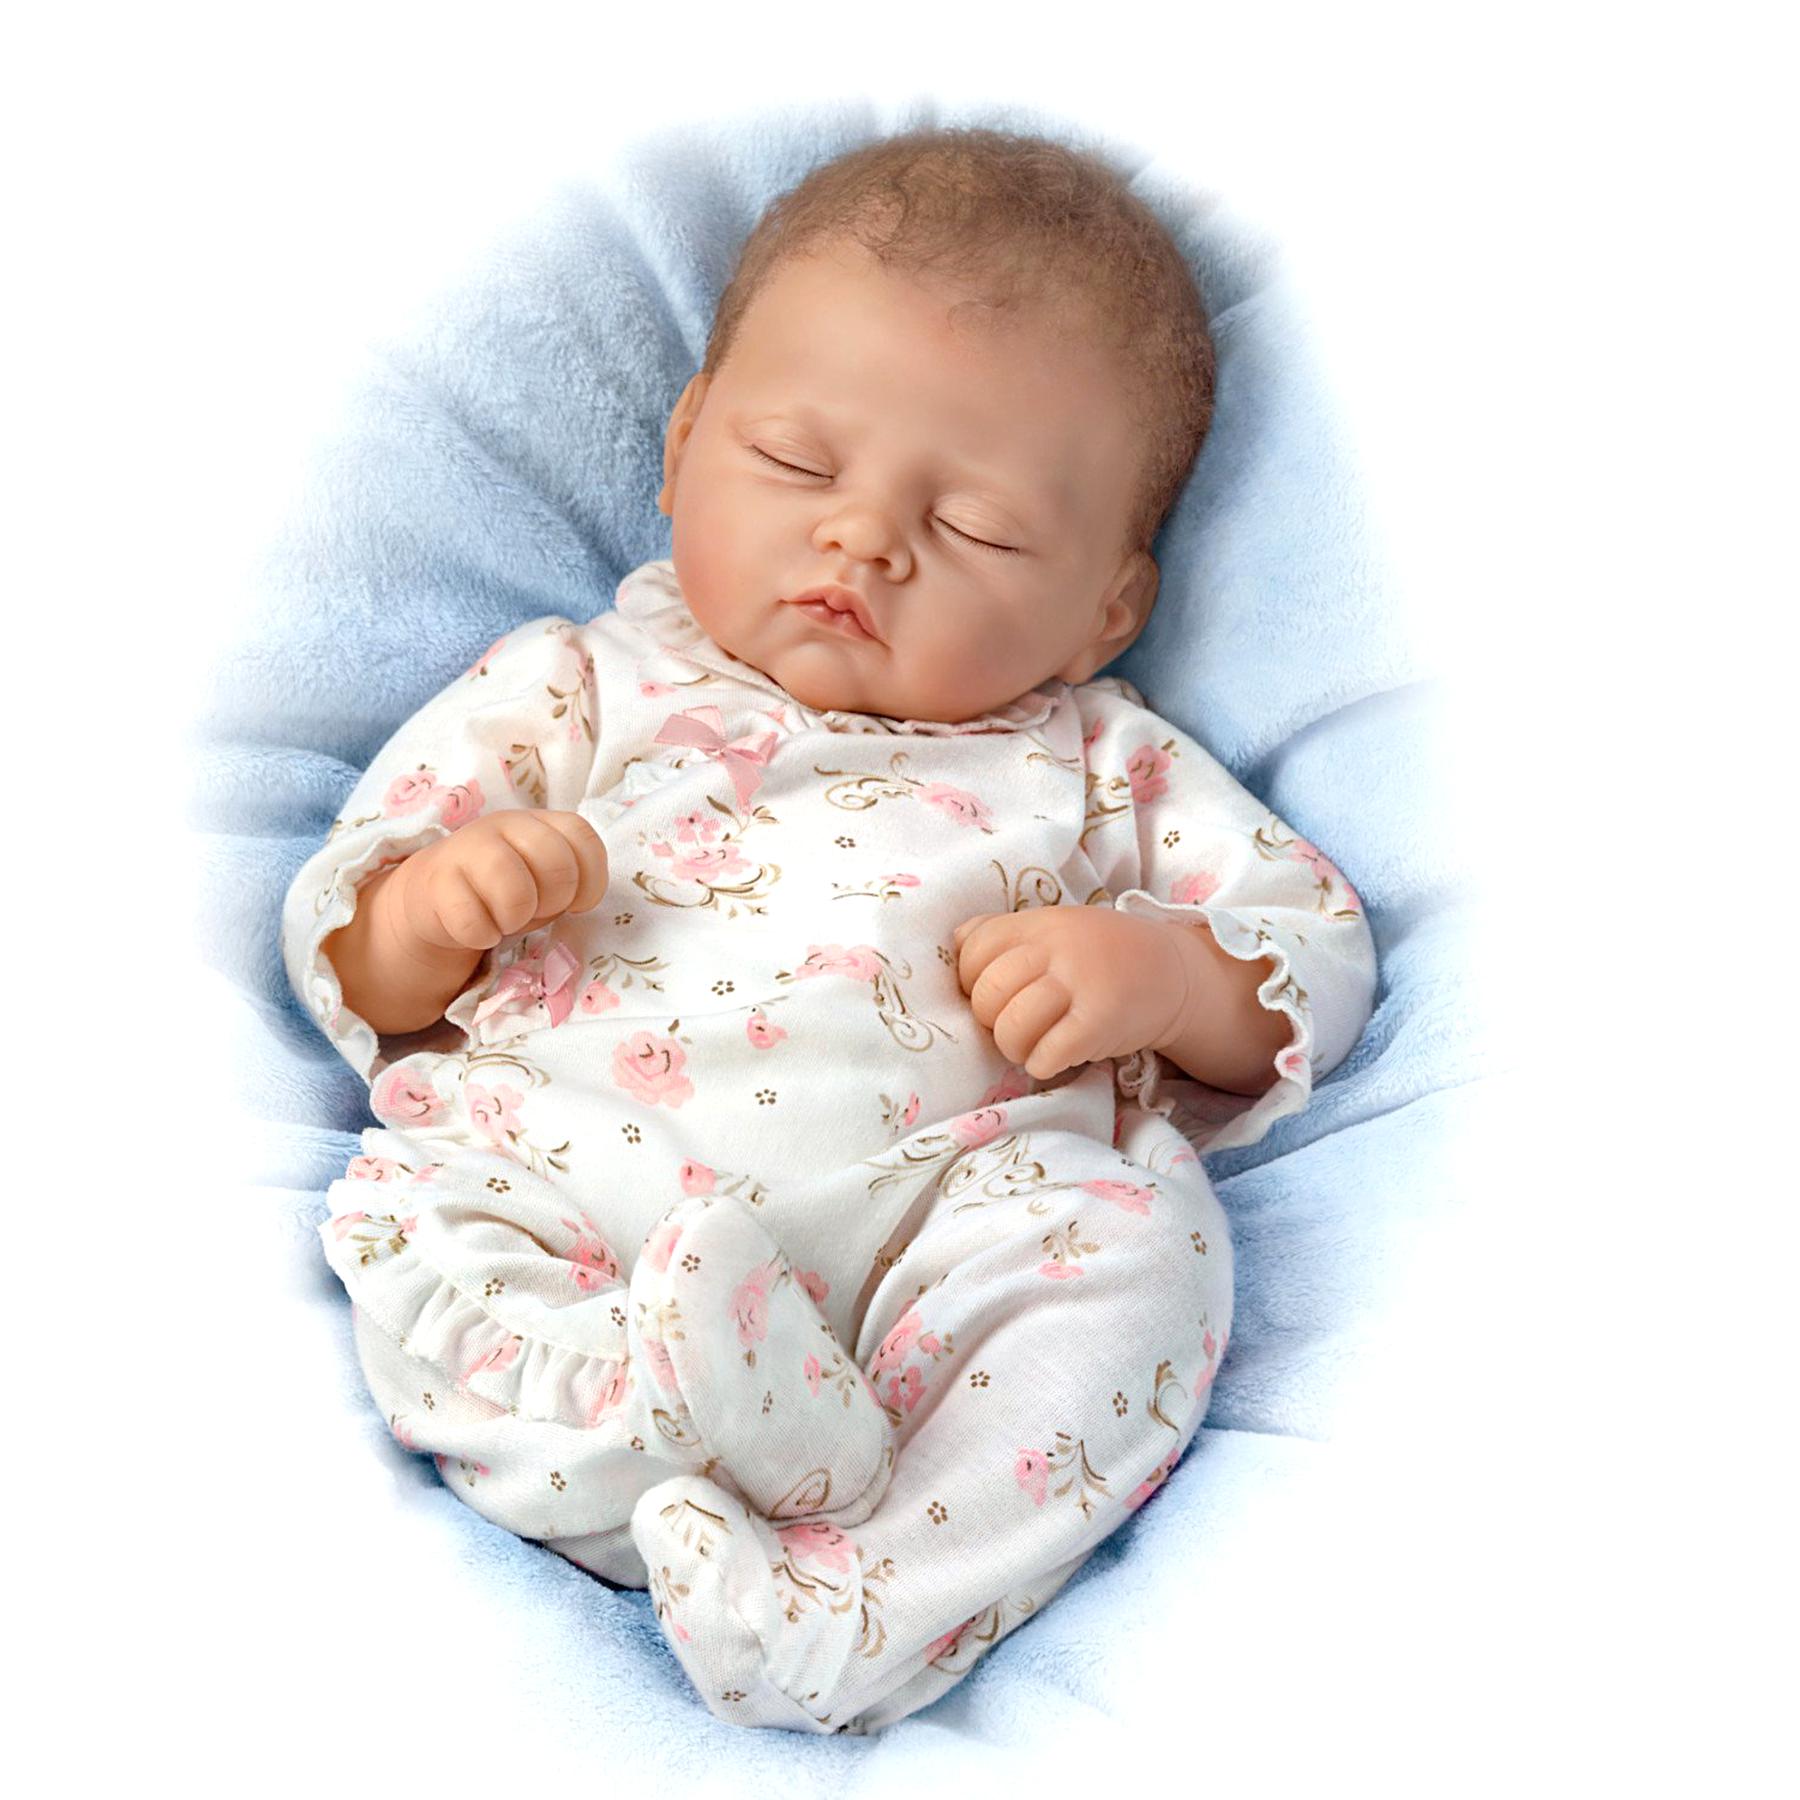 second hand reborn dolls for sale